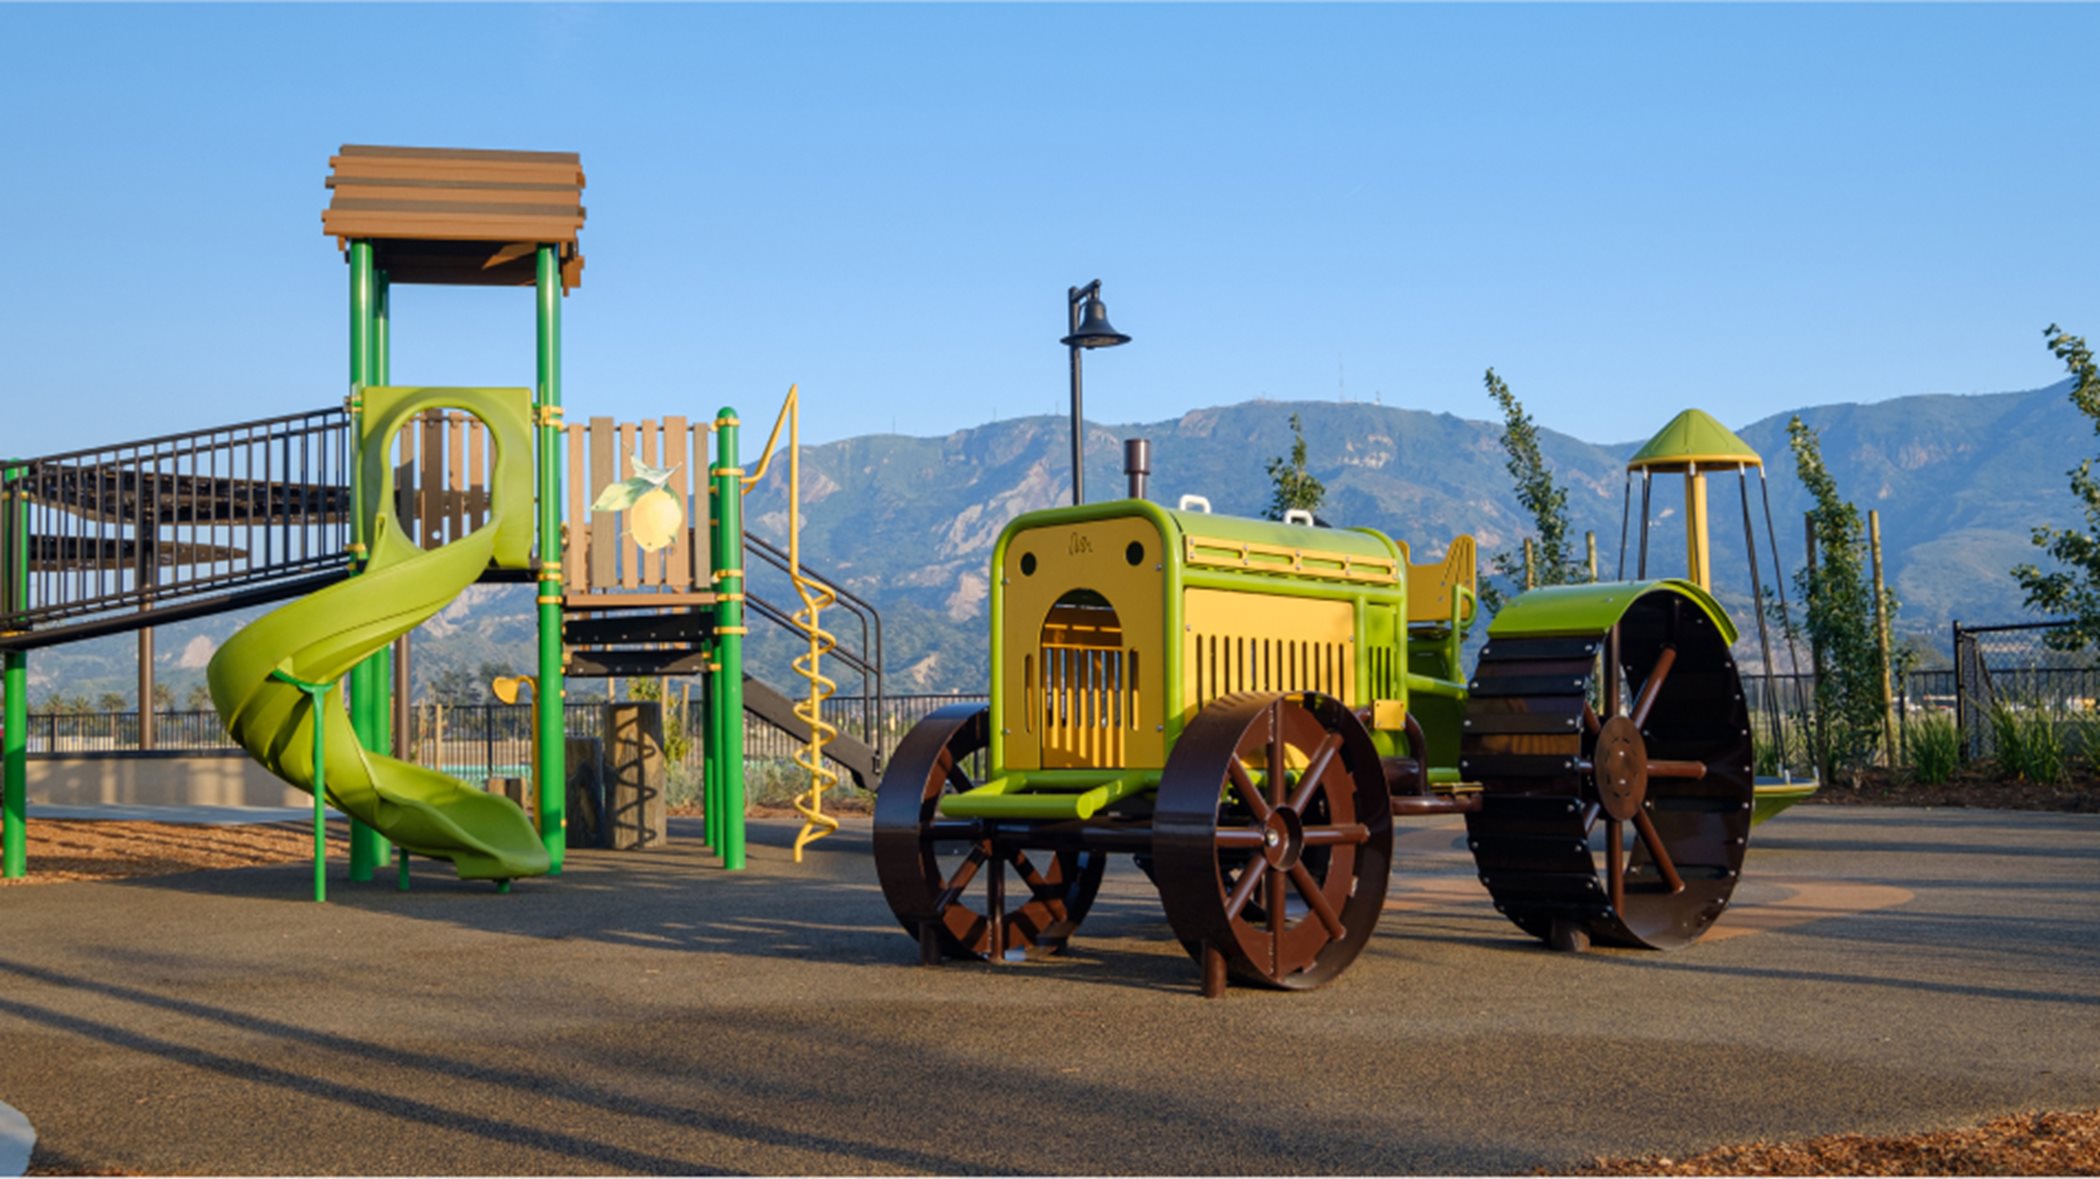 Playground with a play apparatus and fake tractor